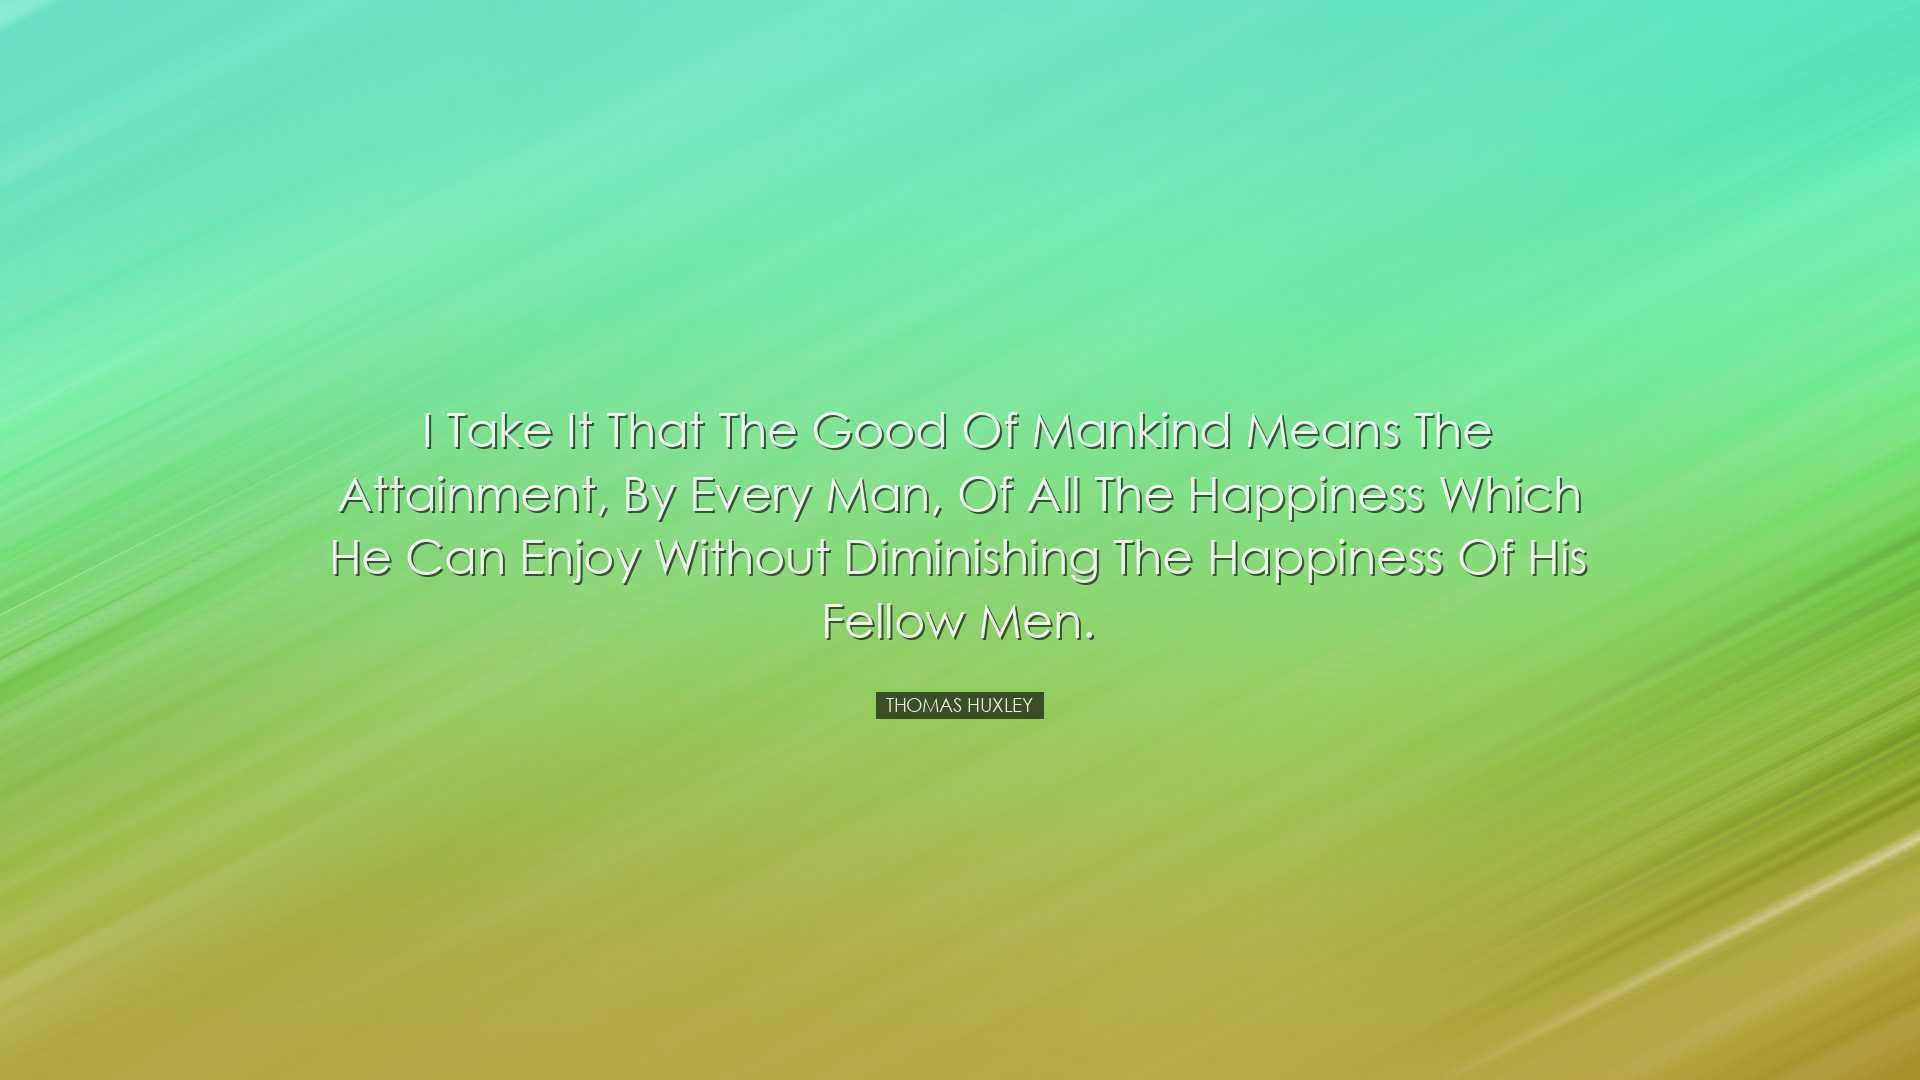 I take it that the good of mankind means the attainment, by every